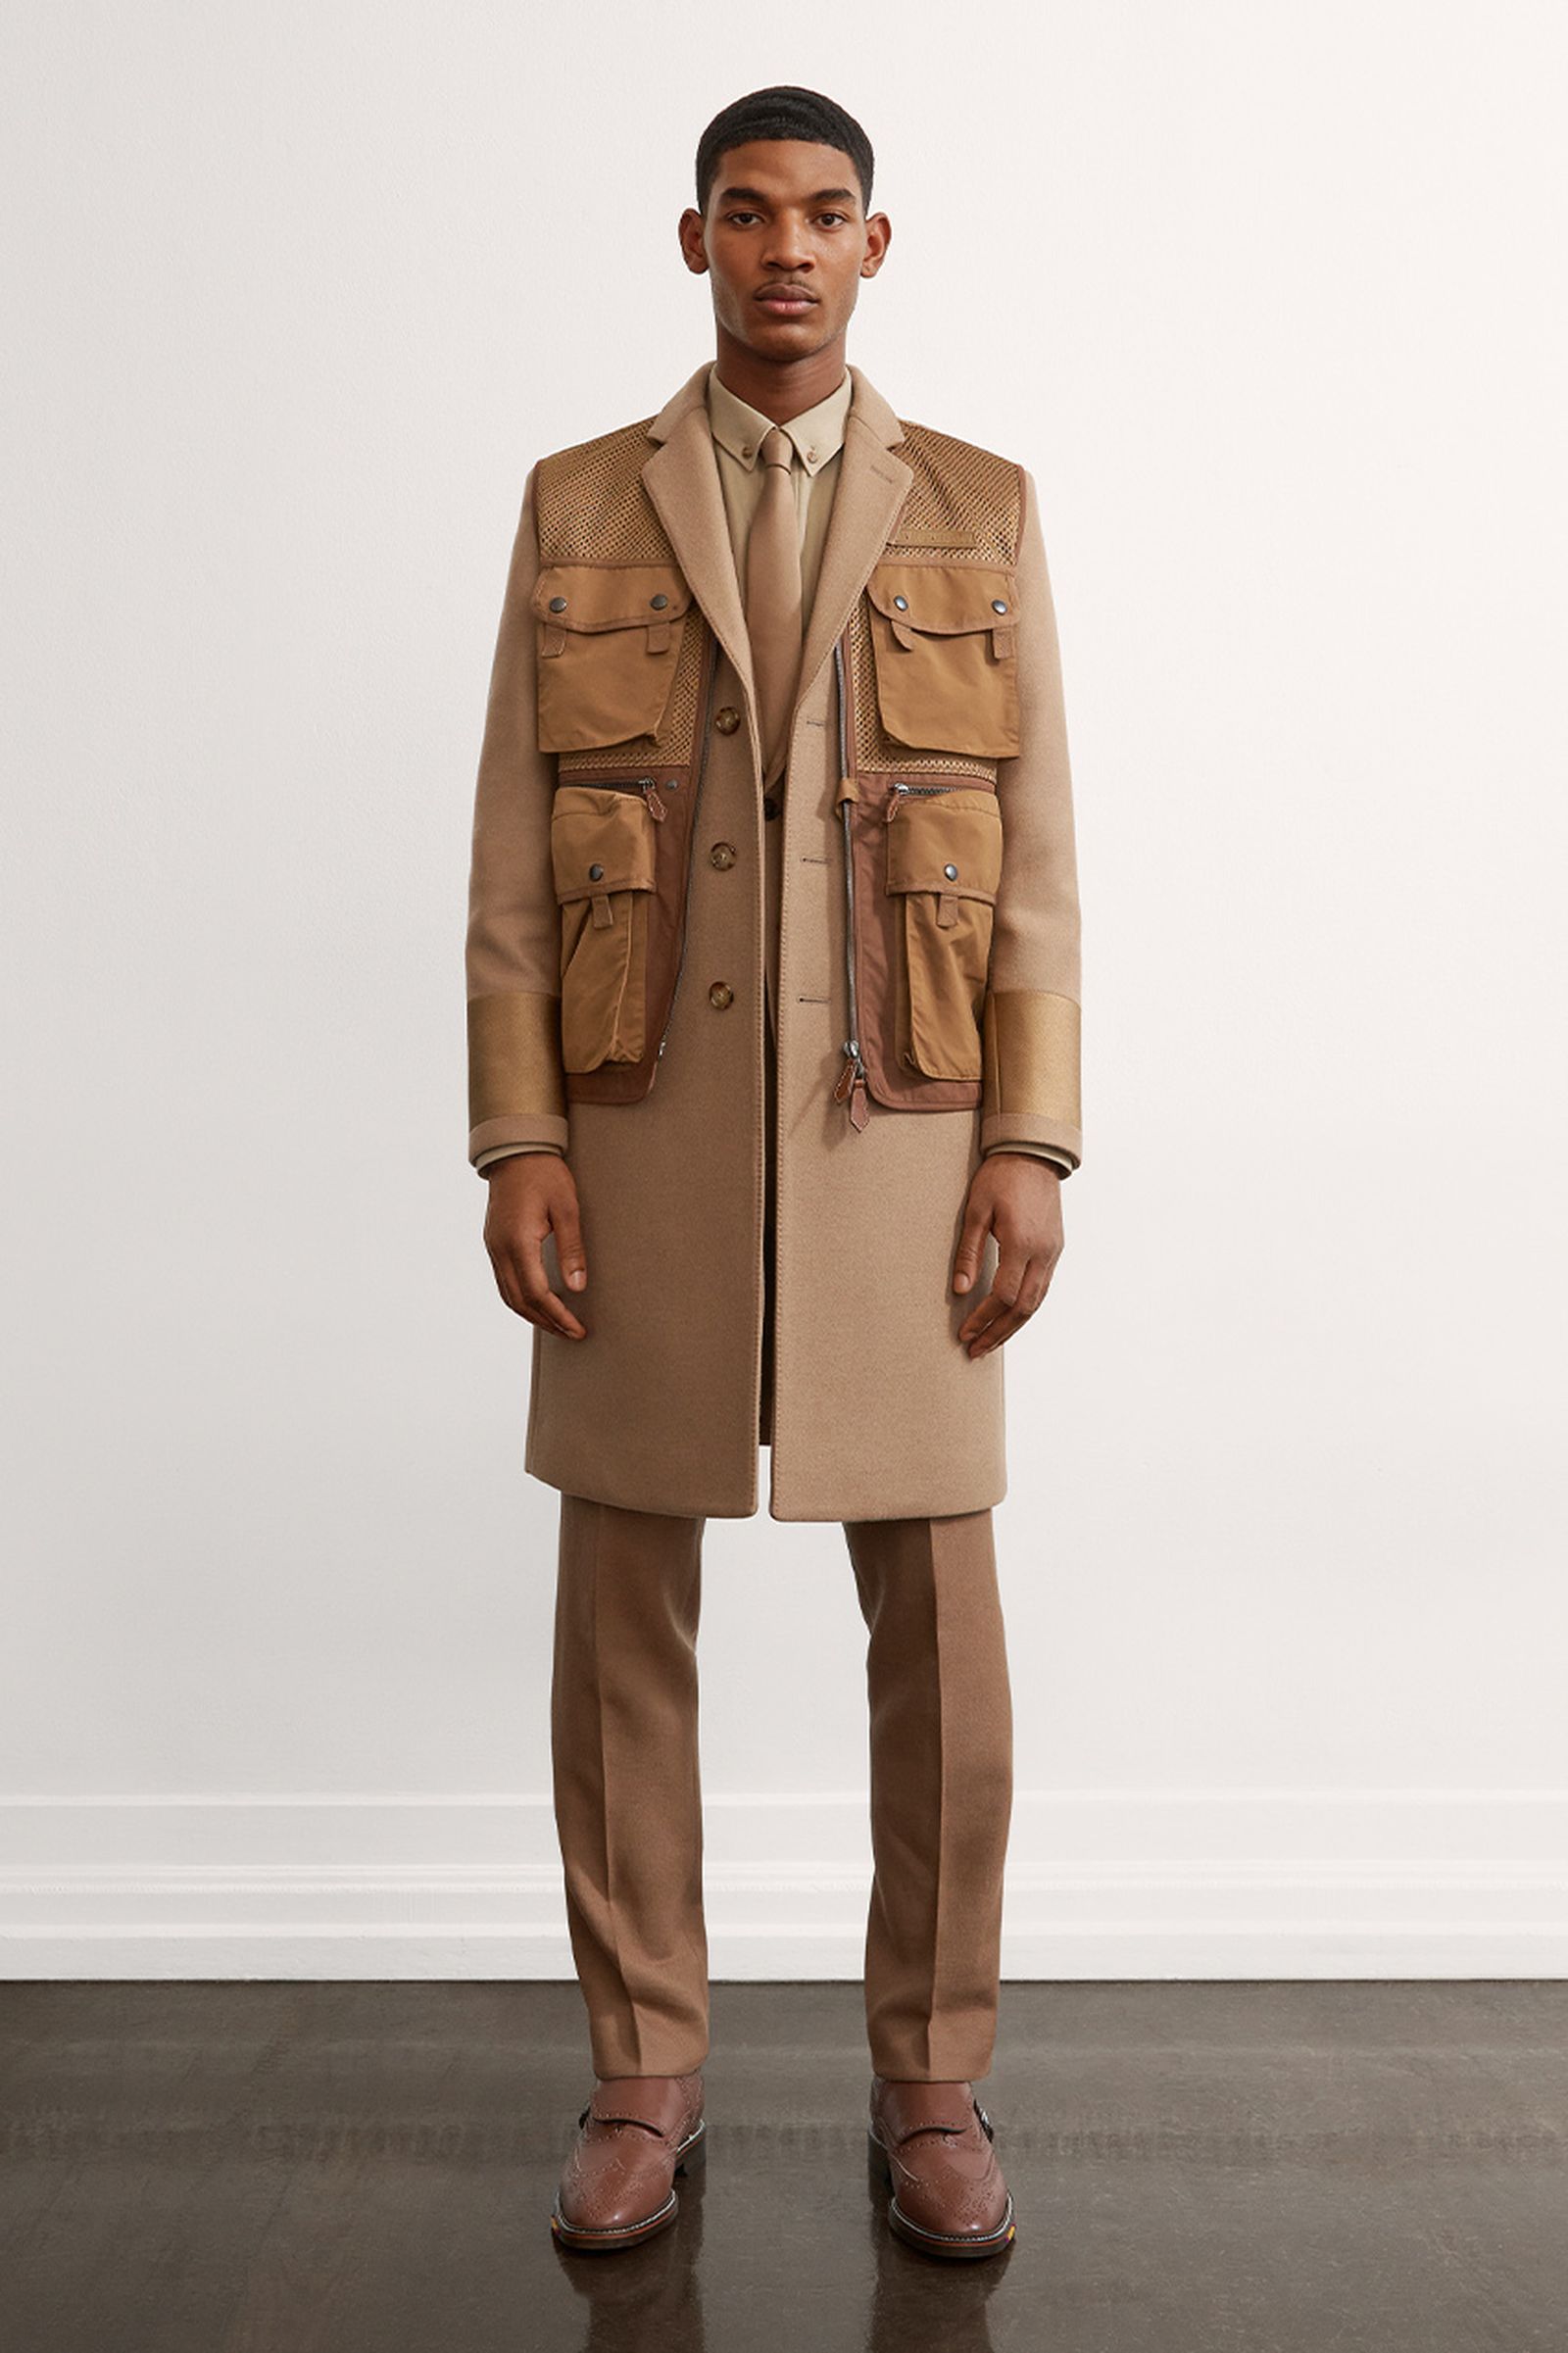 burberry-fall-winter-2021-pre-collection-lookbook-8